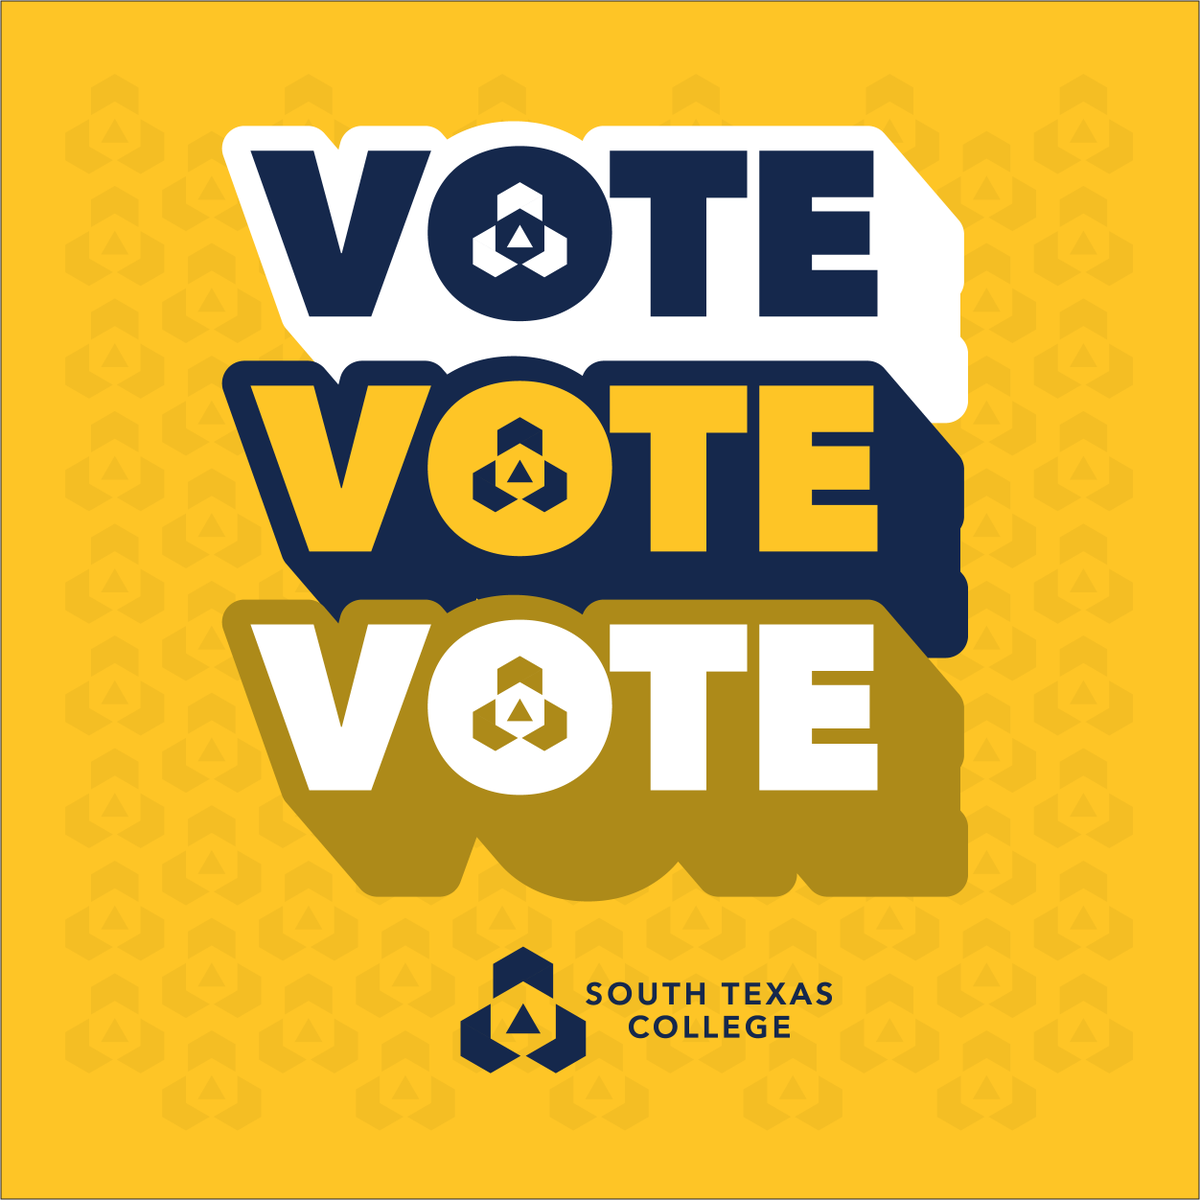 Today is the last day of early voting.

You can still cast your ballot until 7 p.m. at either our Pecan (Student Union) or Nursing & Allied Health (Building B) campuses.

Make your voice count, Jags!

#earlyvoting #STCvotes #JagsVote #STCpride